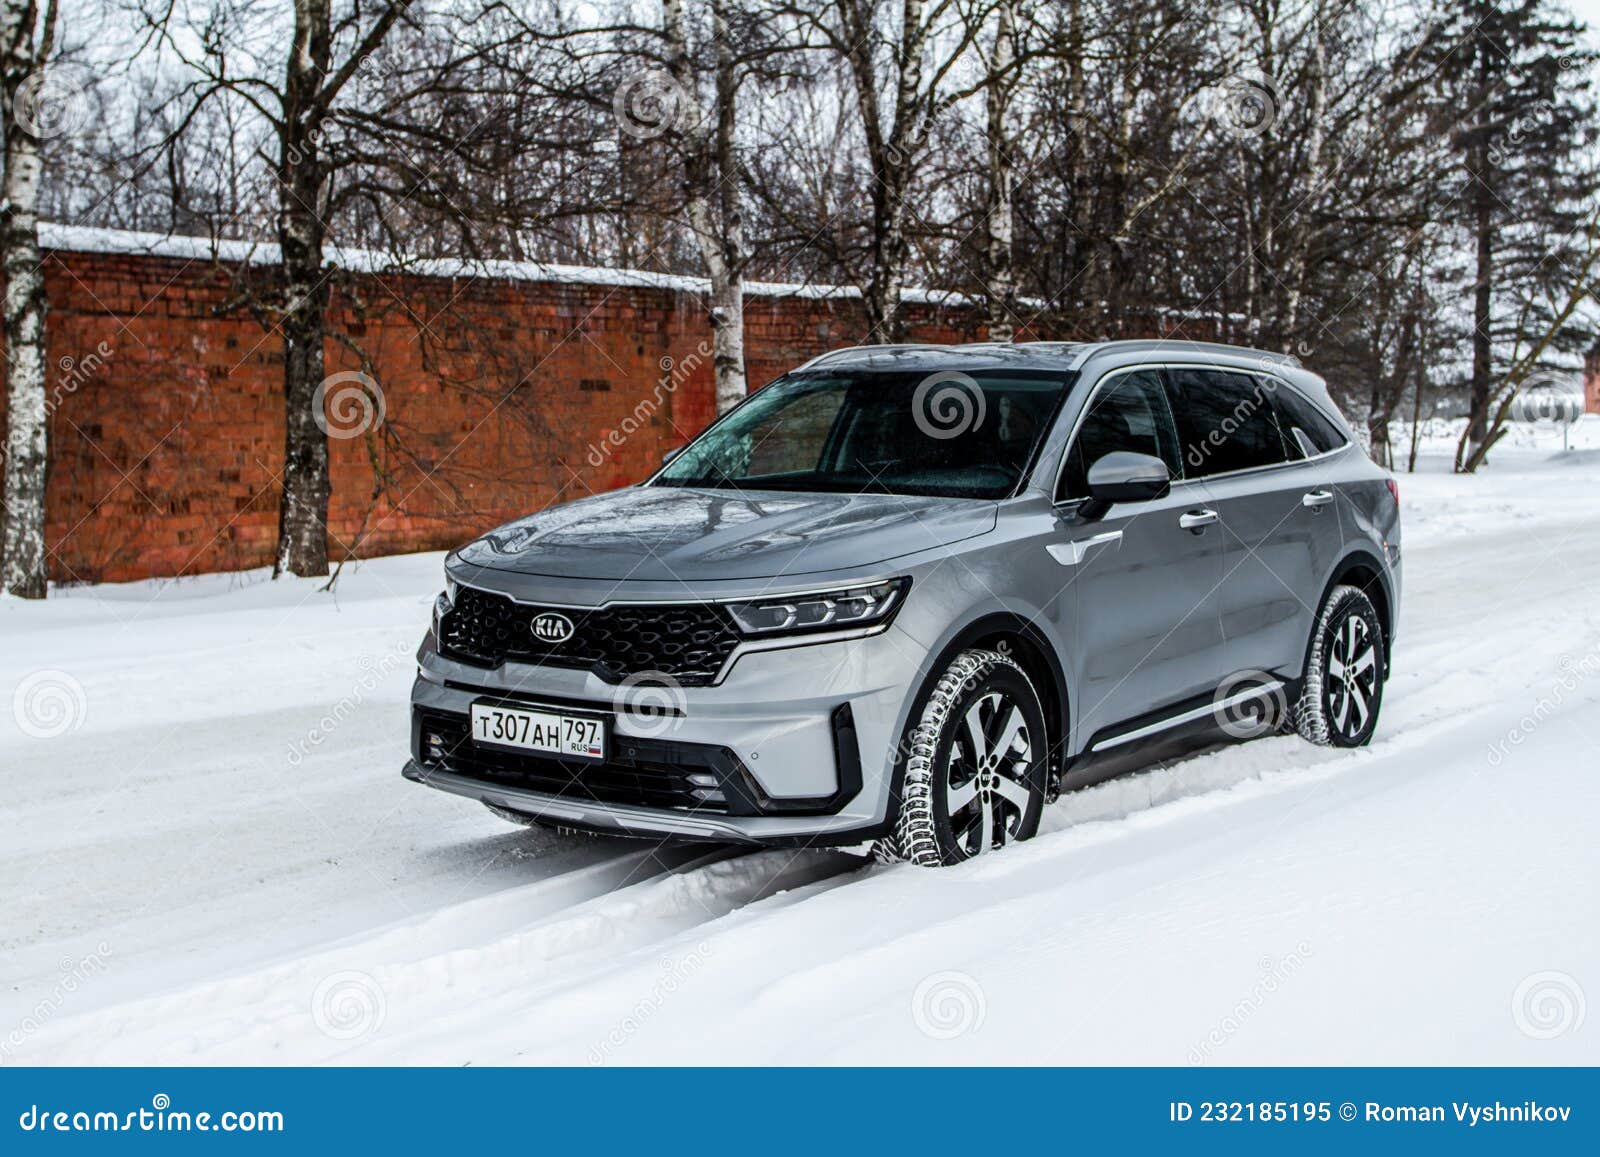 https://thumbs.dreamstime.com/z/moscow-russia-february-kia-sorento-fourth-generation-mq-compact-crossover-suv-model-year-exterior-front-side-close-up-view-232185195.jpg